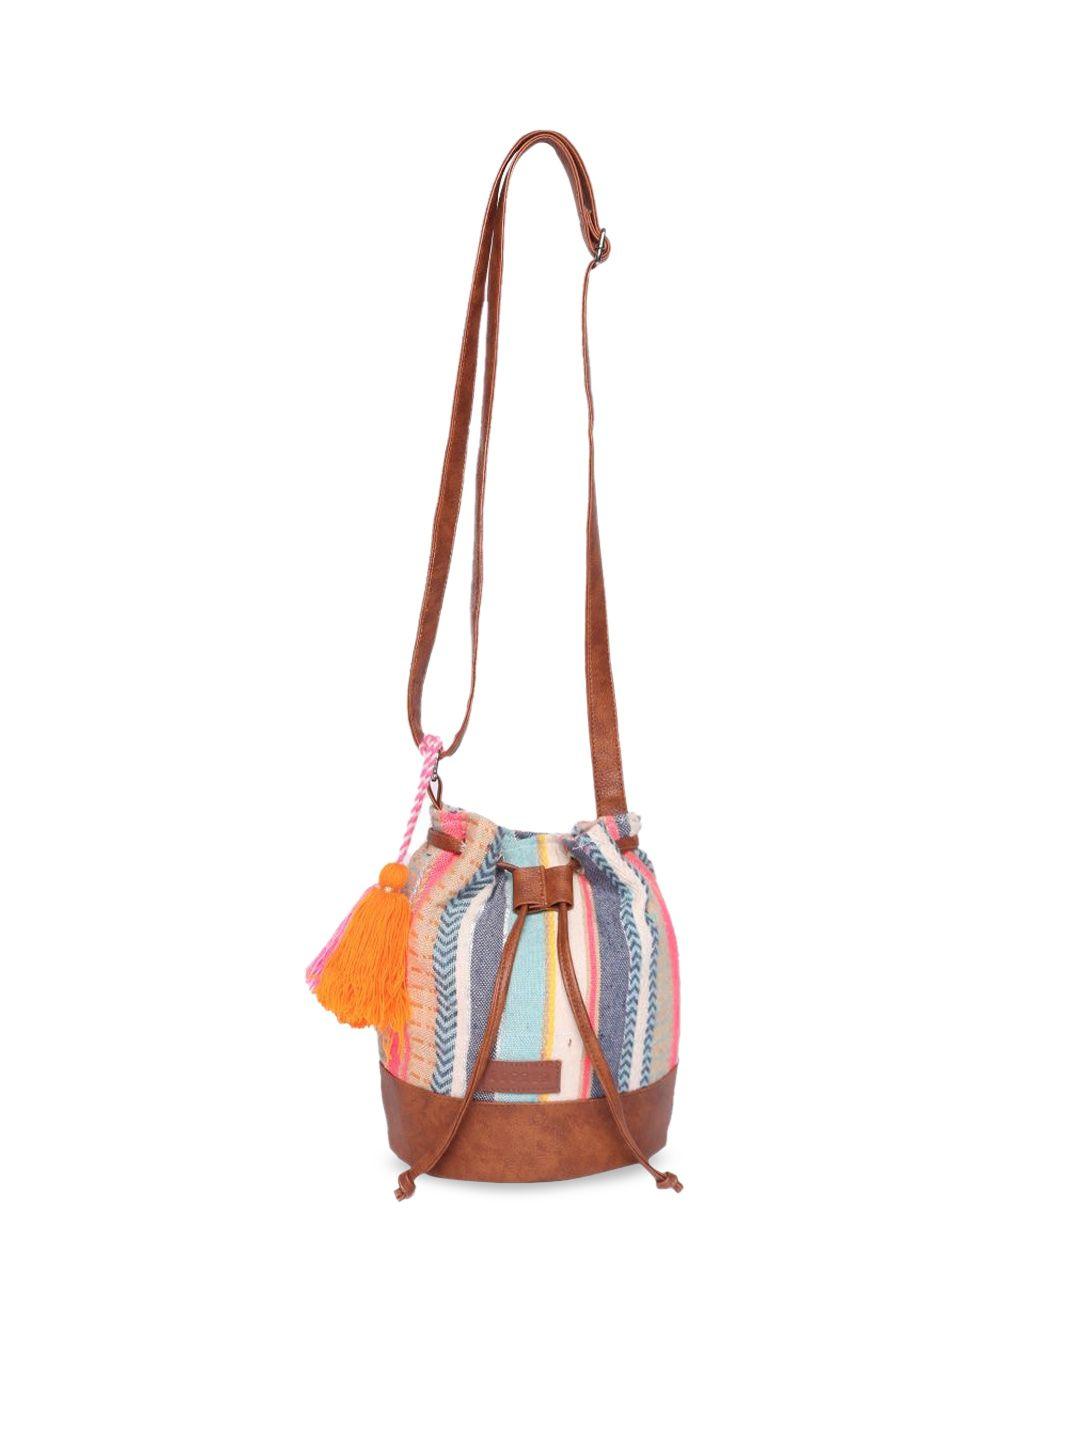 astrid striped bucket sling bag with tasselled